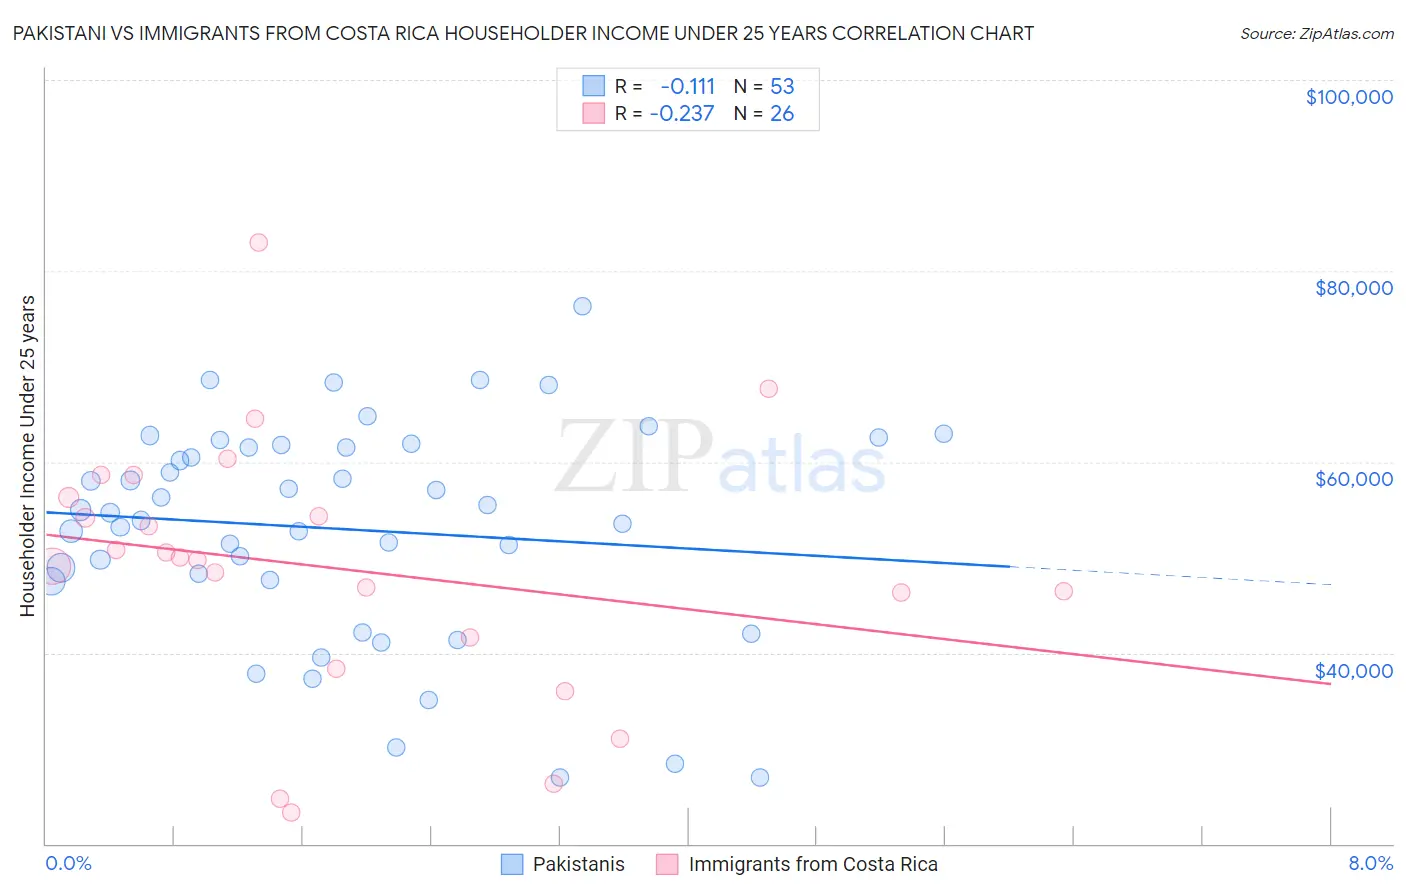 Pakistani vs Immigrants from Costa Rica Householder Income Under 25 years